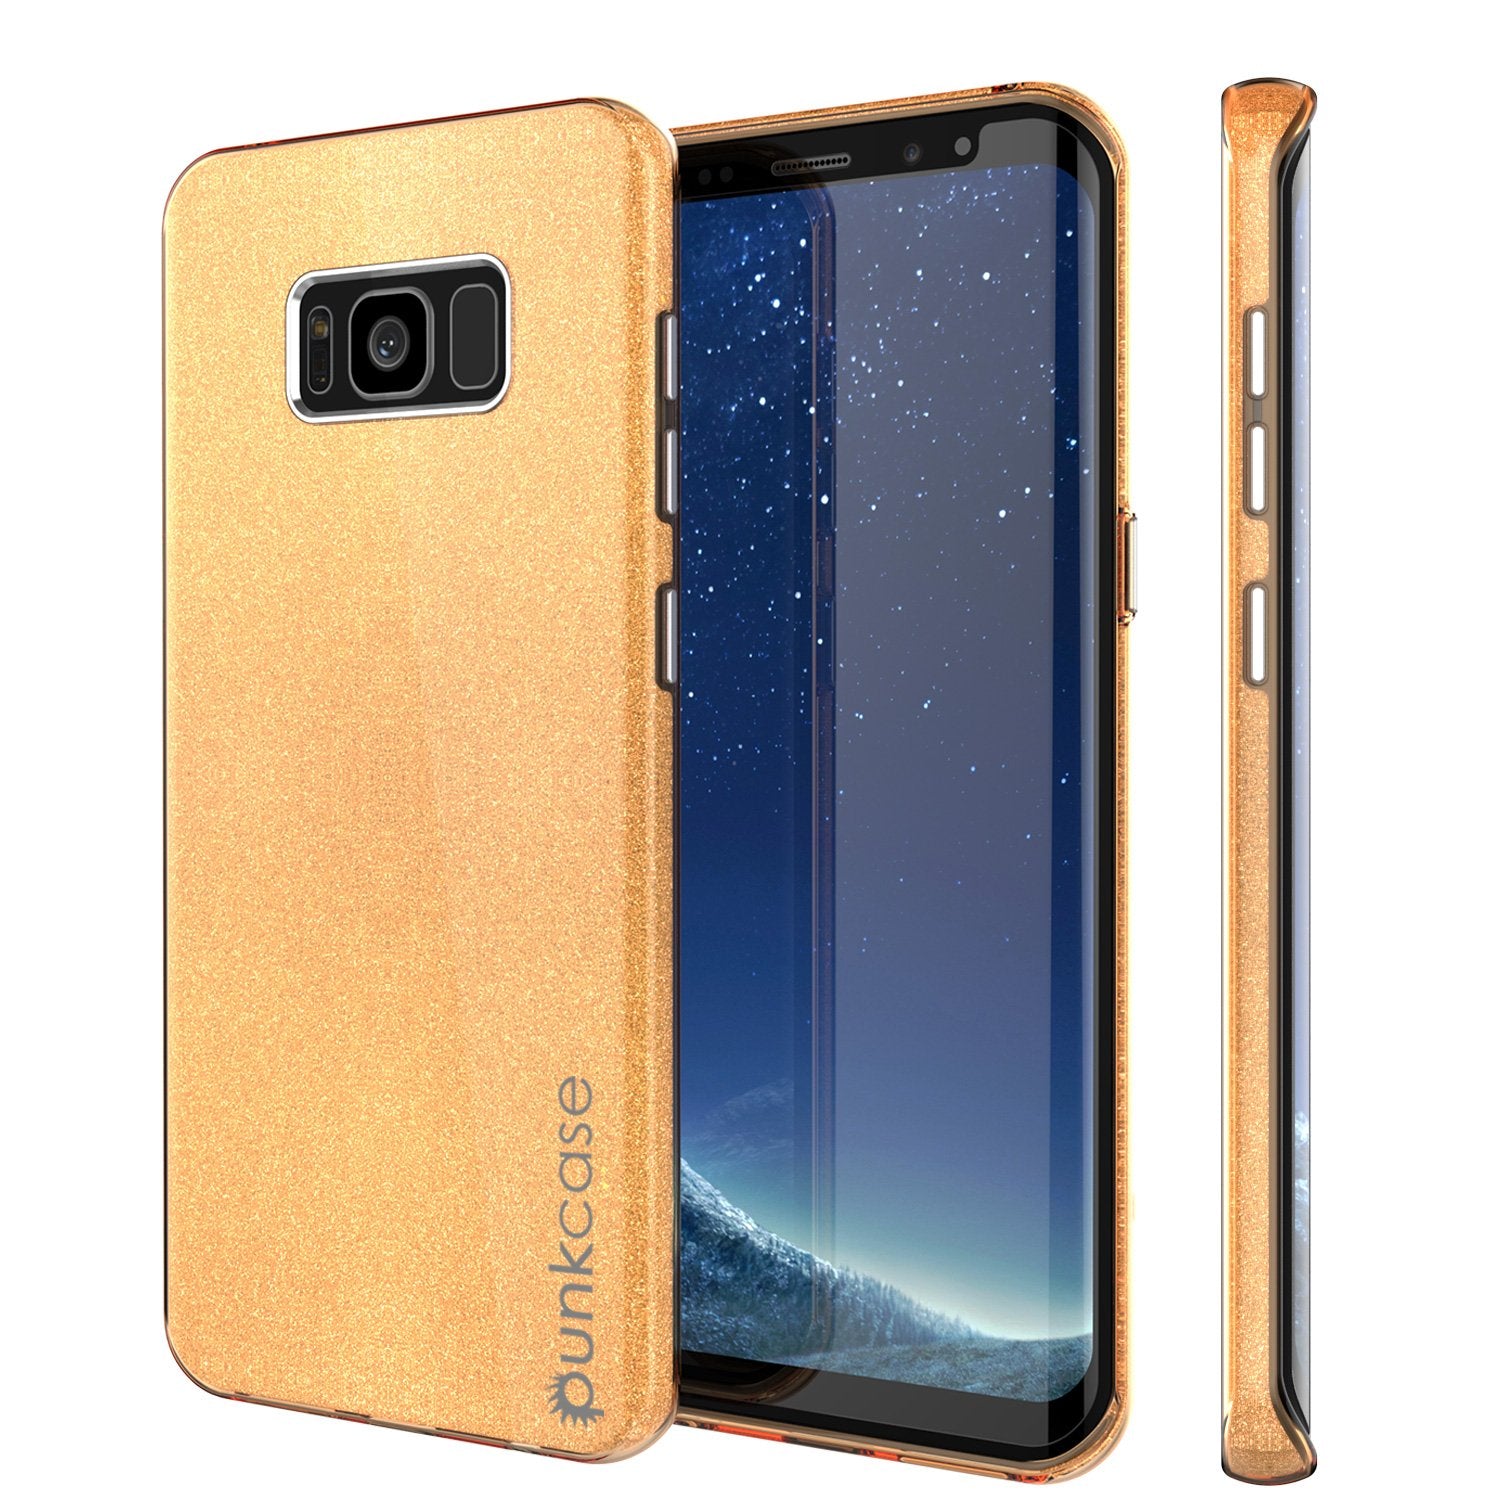 Galaxy S8 Case, Punkcase Galactic 2.0 Series Ultra Slim Protective Armor Cover [Gold]